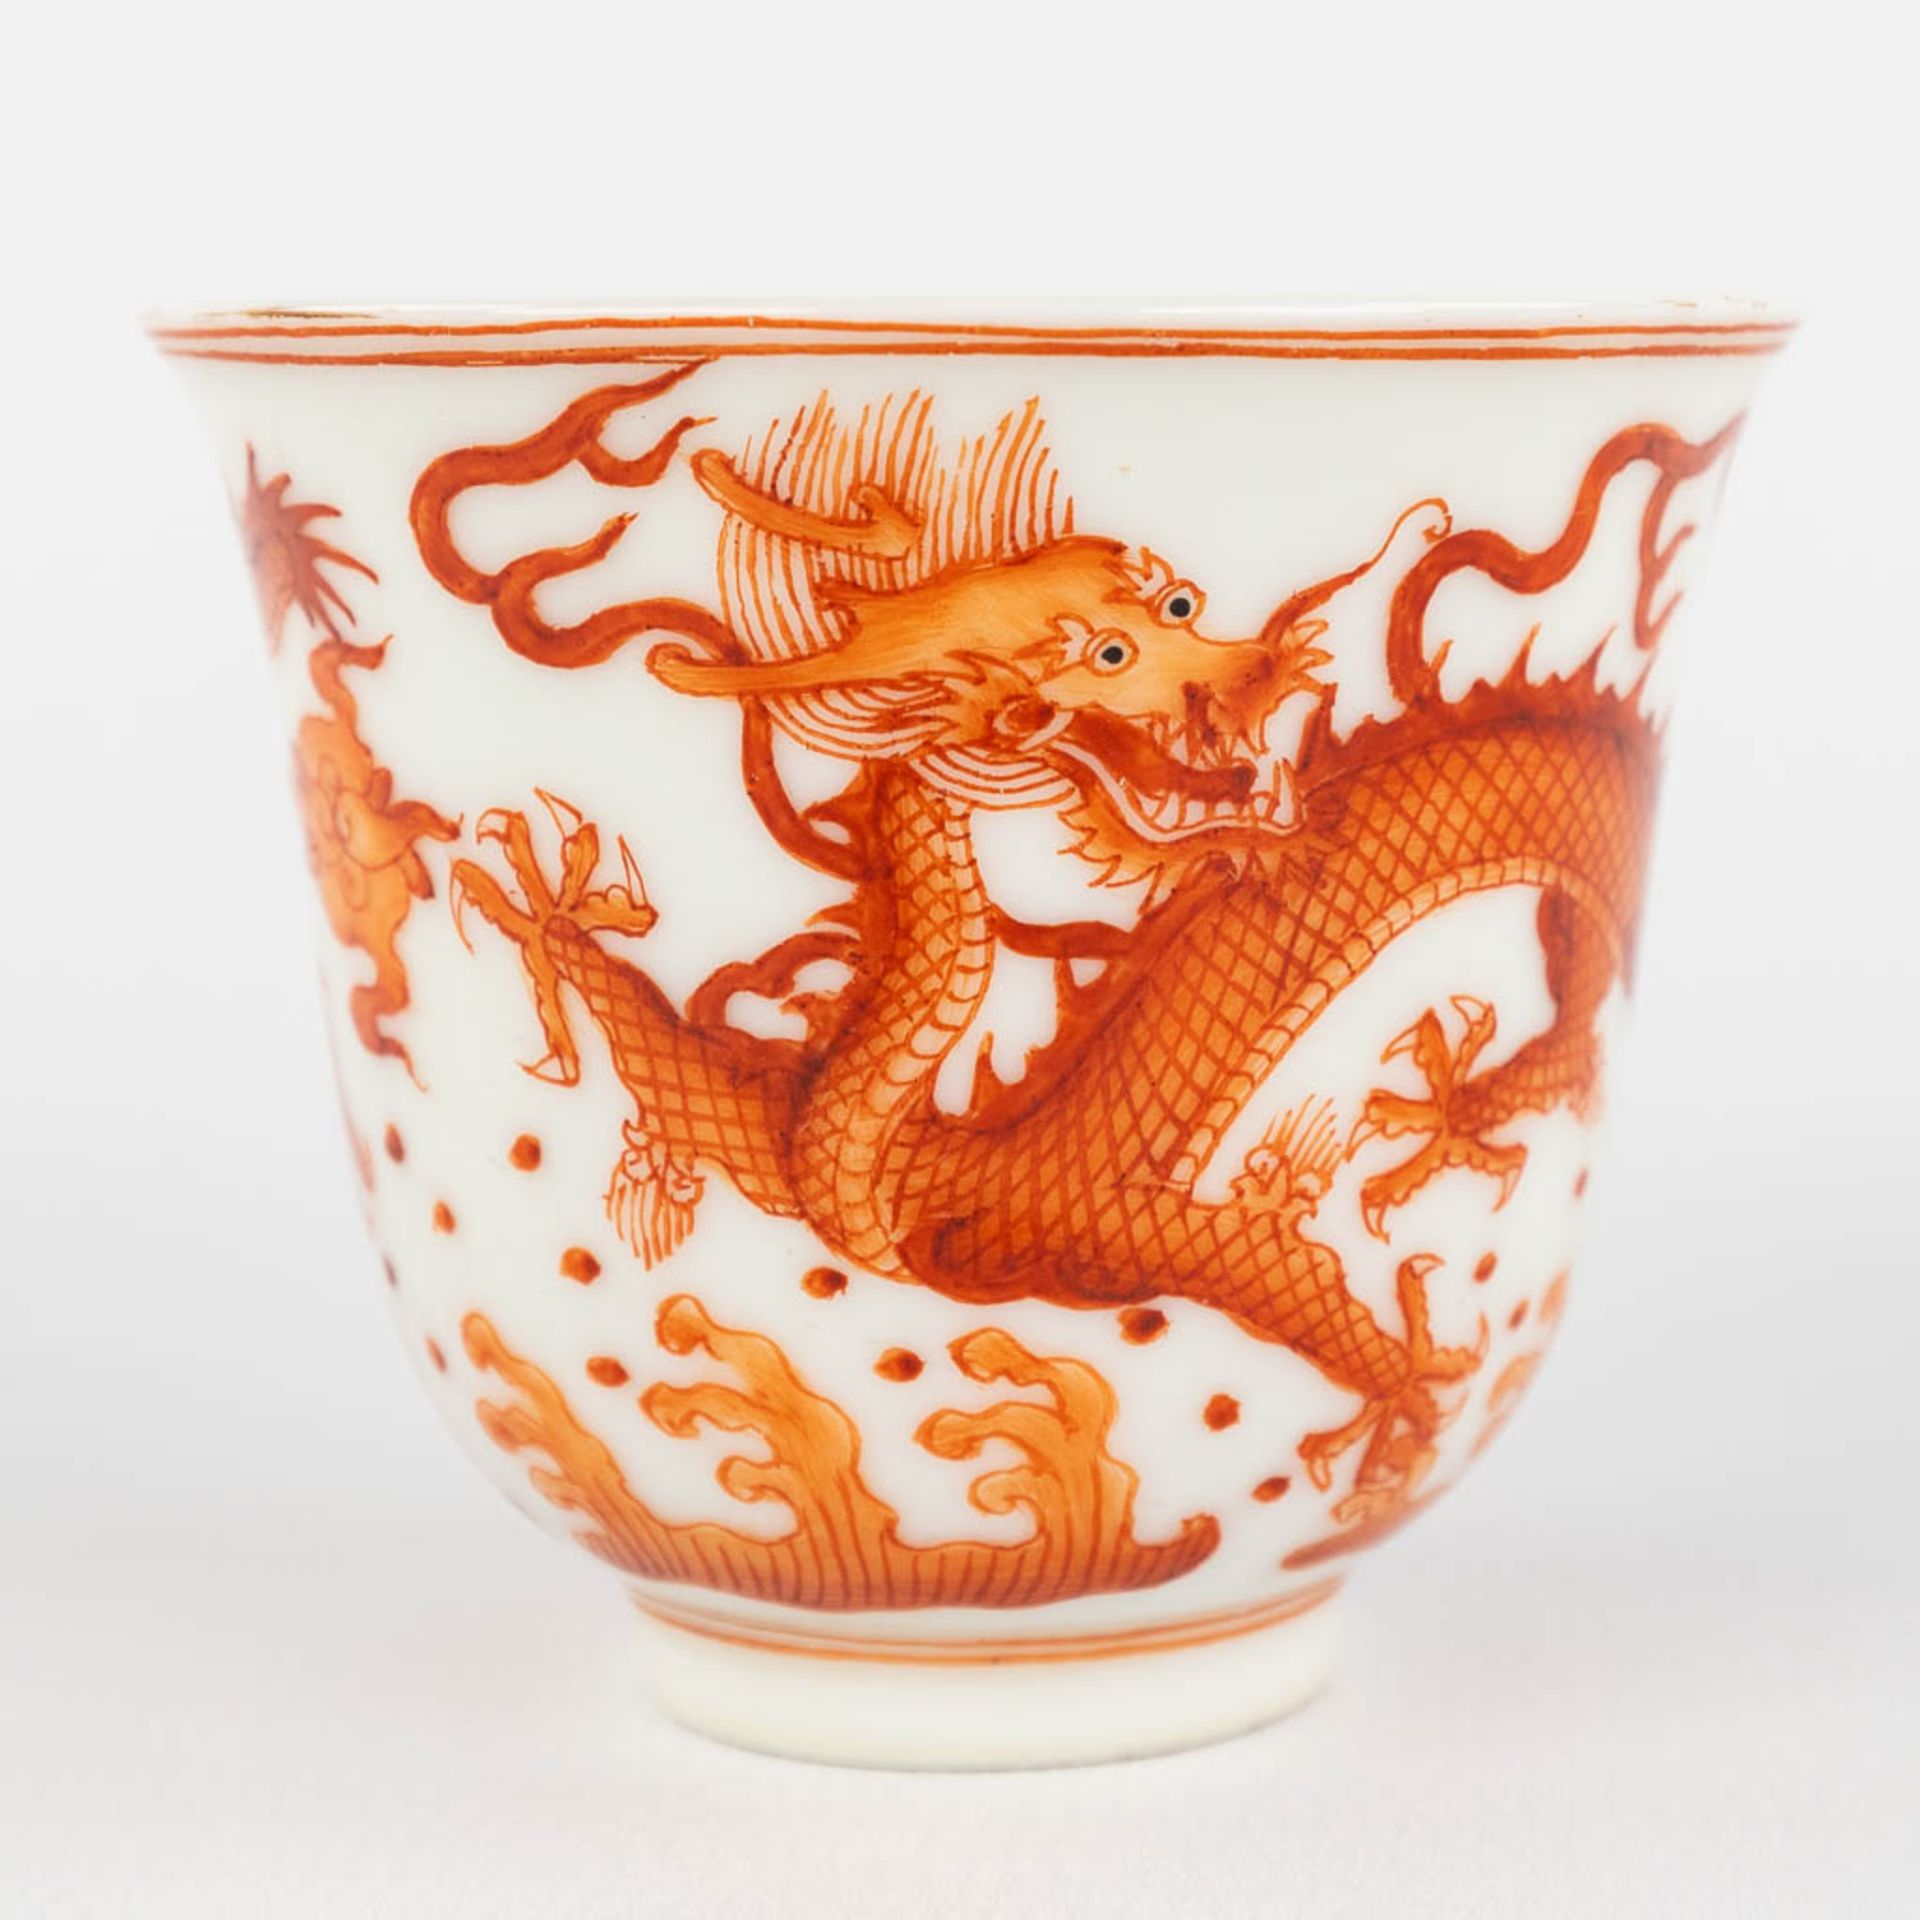 A pair of Chinese teacups, red dragon decor, Guangxu mark and period. (D:6 x H:5 cm) - Image 9 of 9